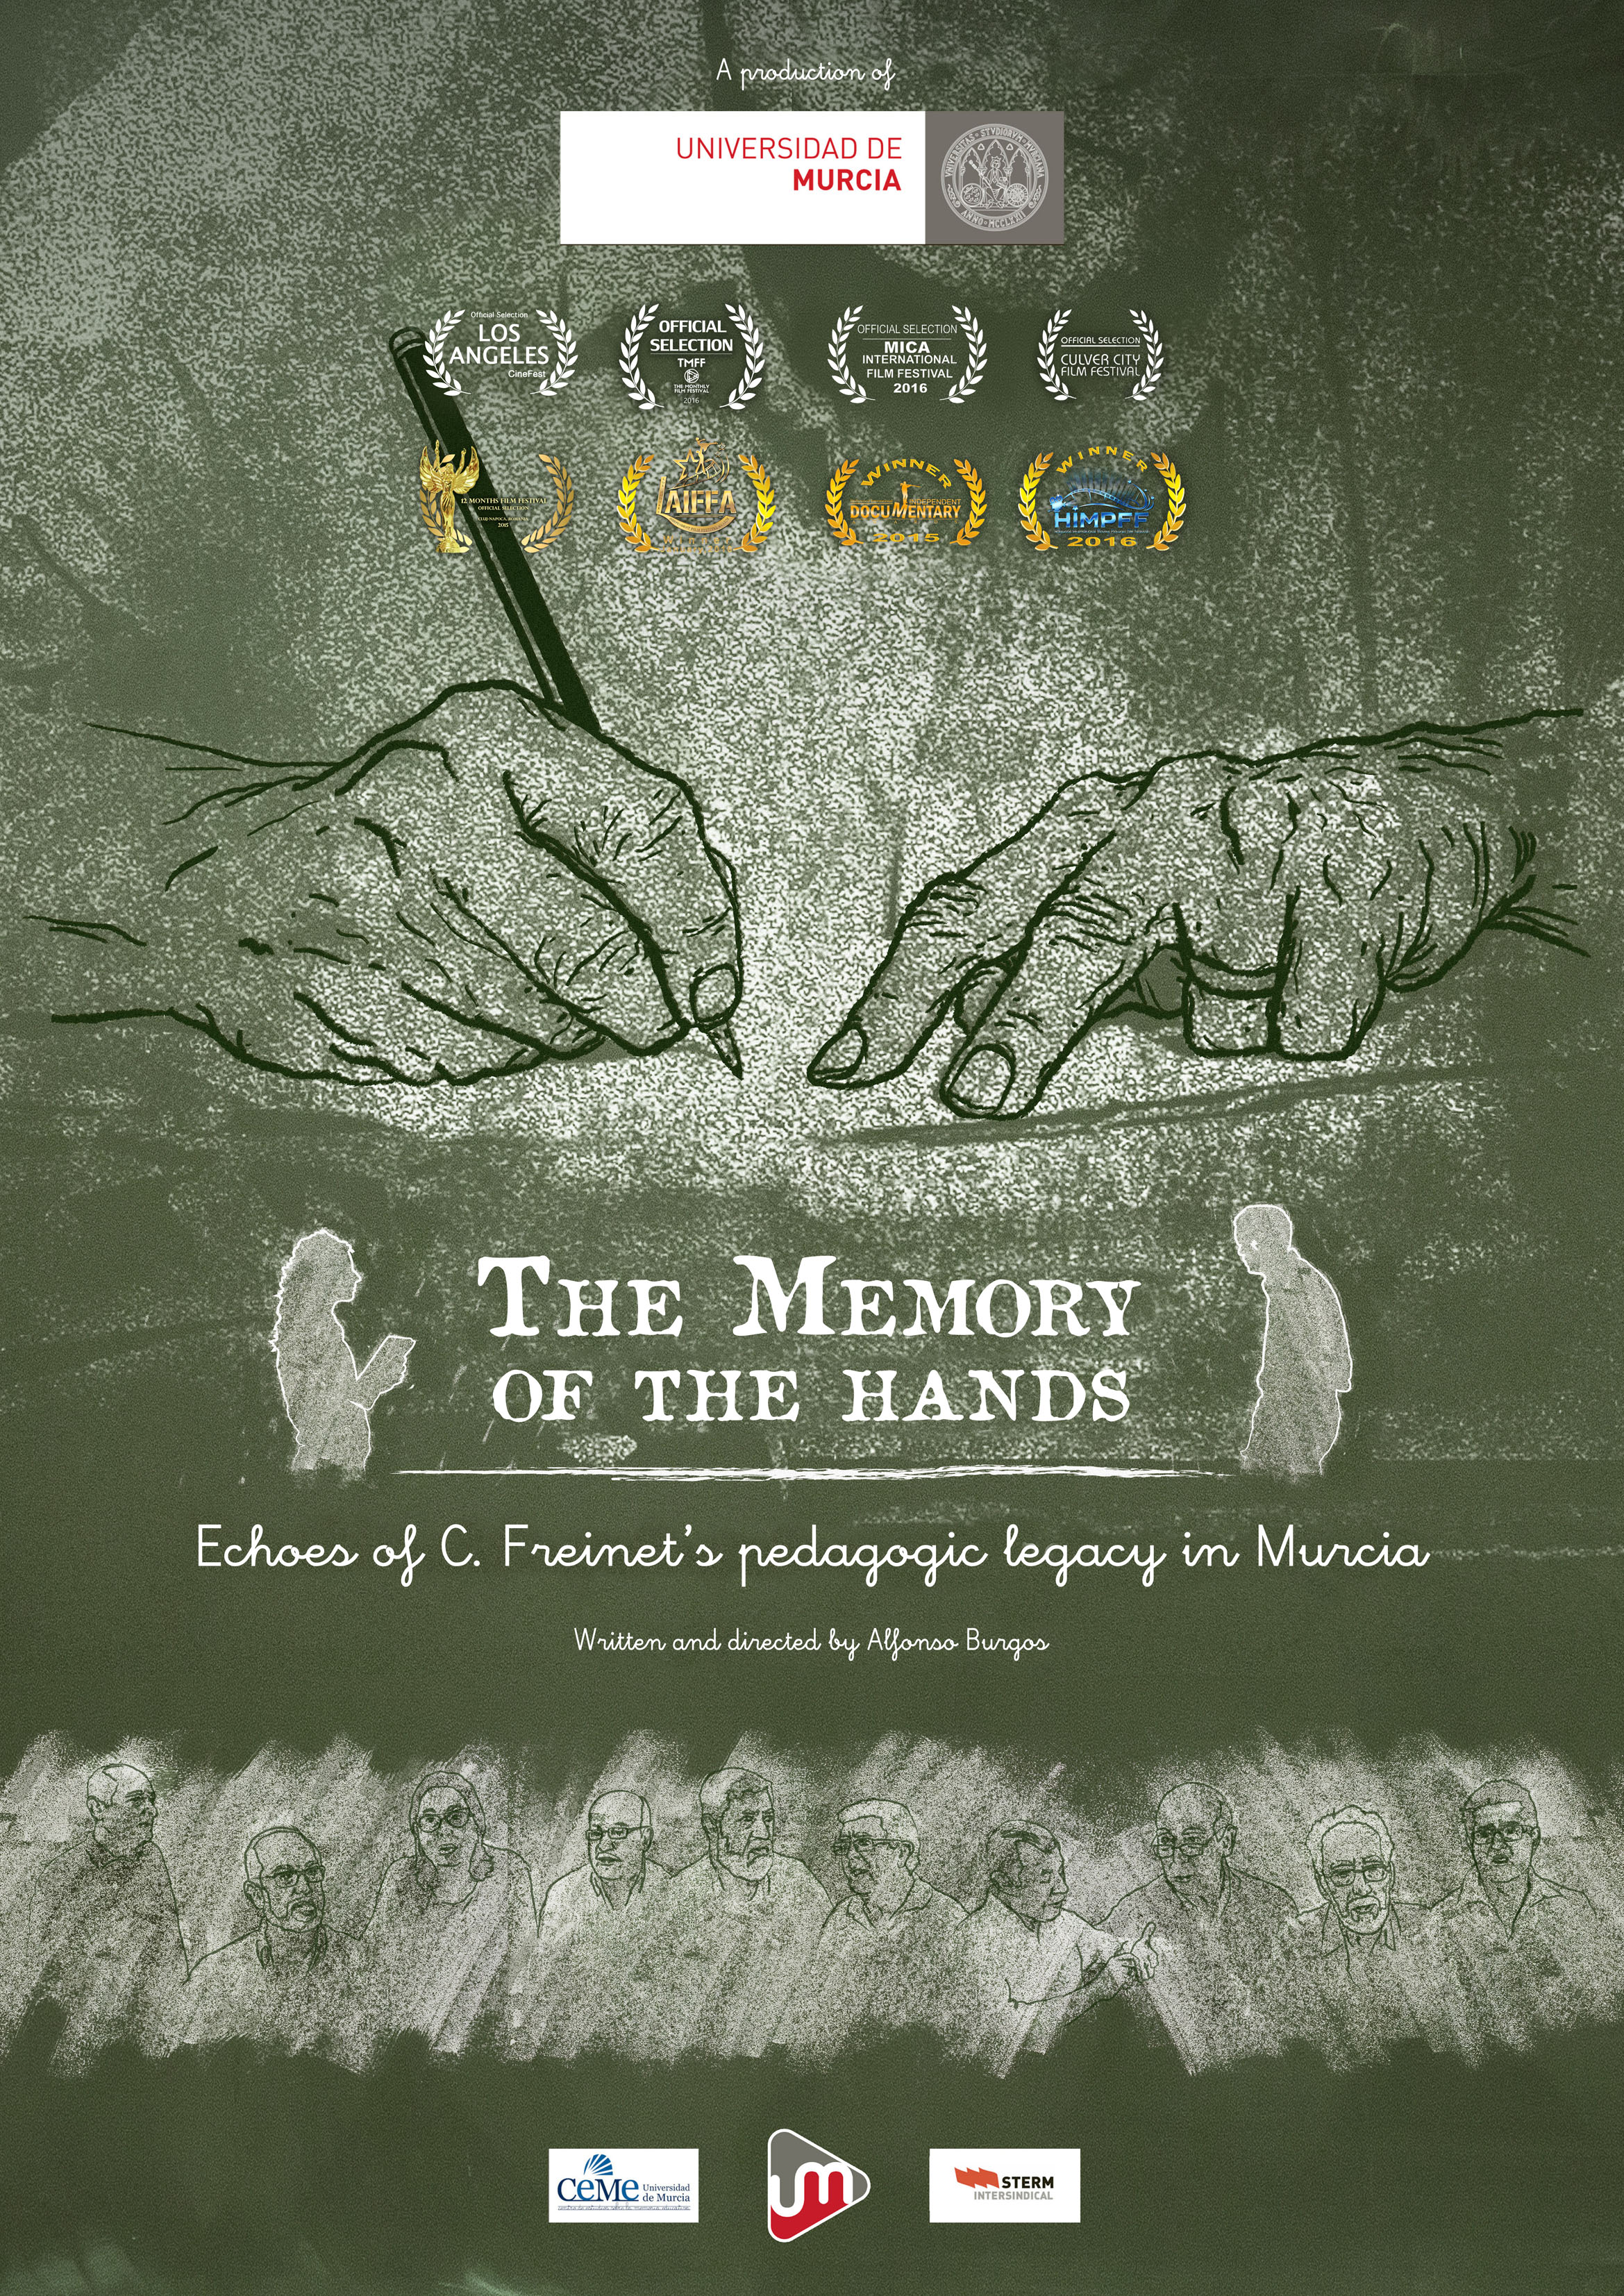 The Memory of the Hands: Echoes of the C. Freinet's Pedagogic Legacy in Murcia